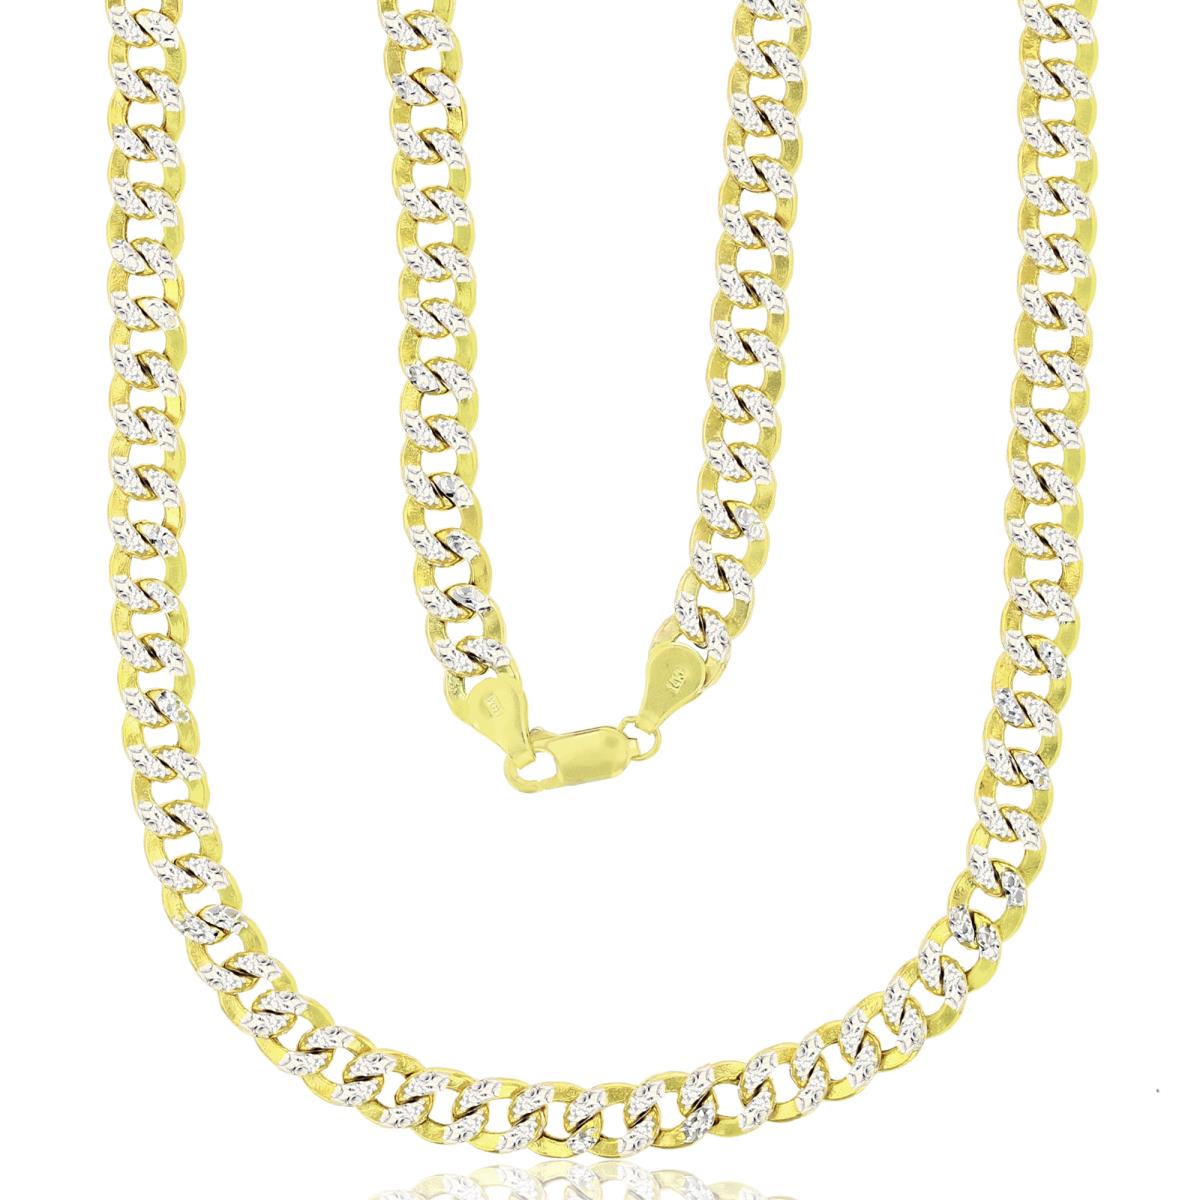 14K Yellow Gold 150 Hollow Cuban White Pave 24" Chain